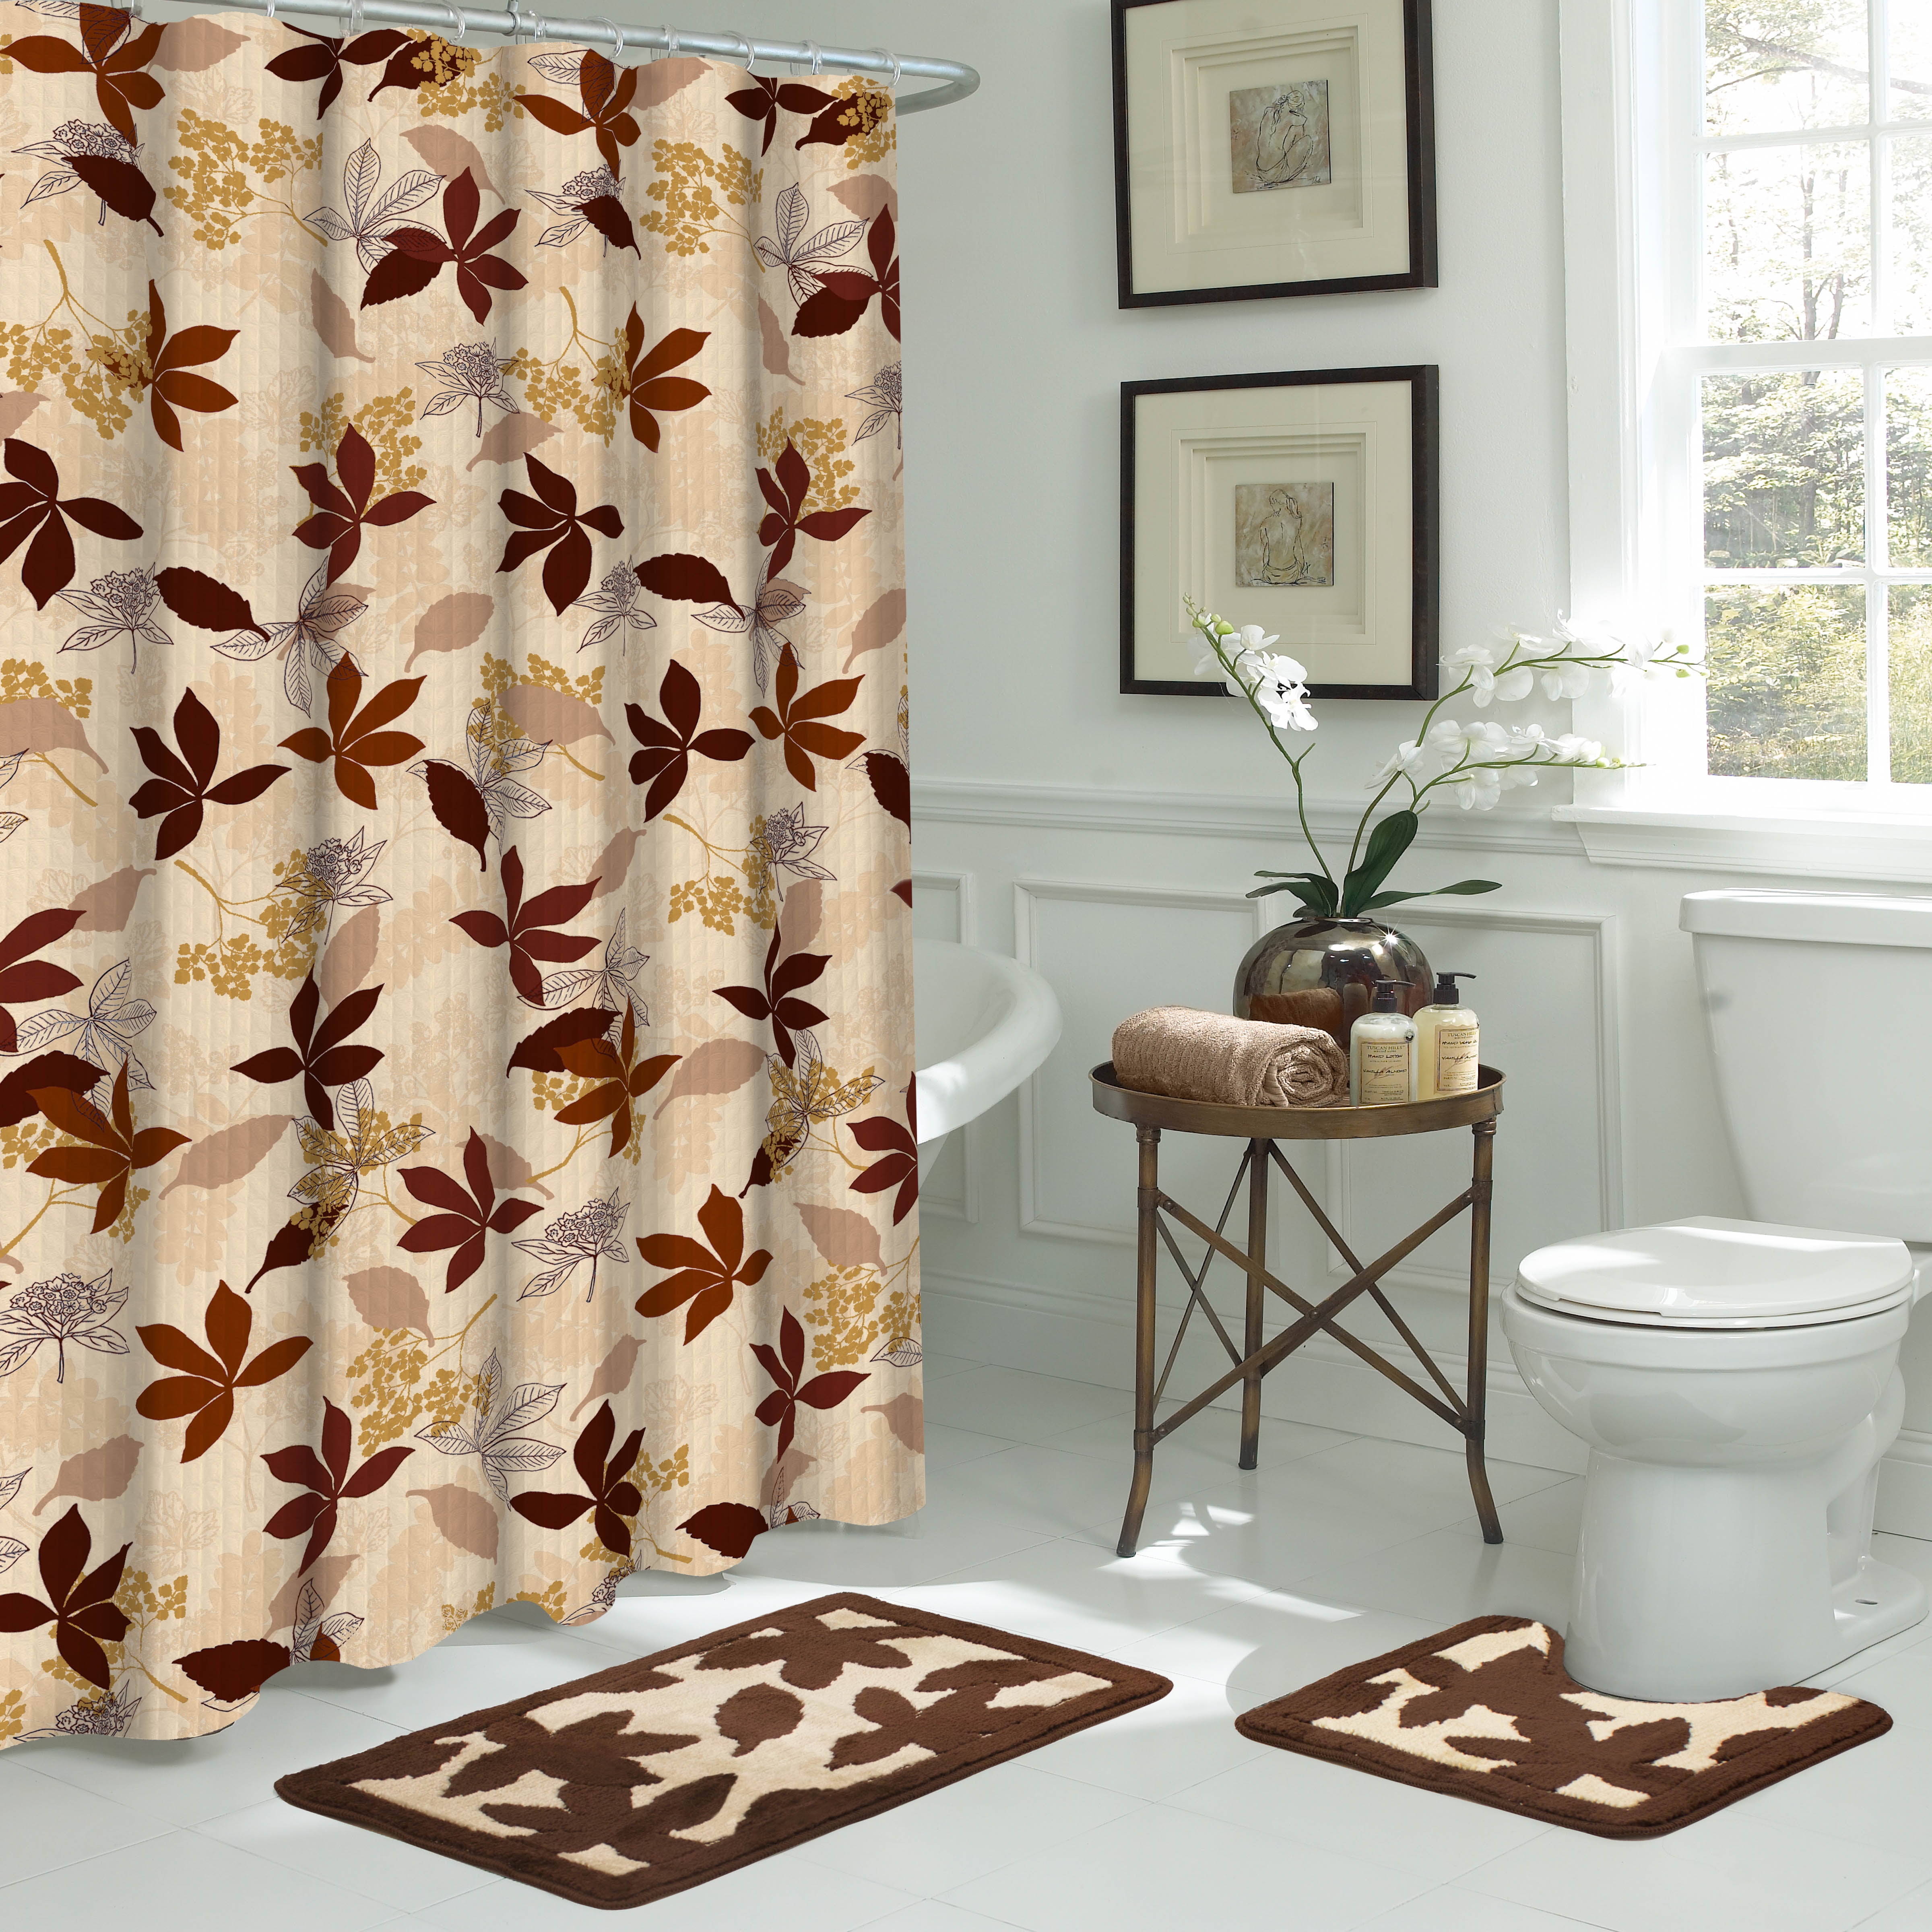 VCNY Home 72 In X 72 In Boucle Embroidery White & Brown Fabric Shower Curtain 